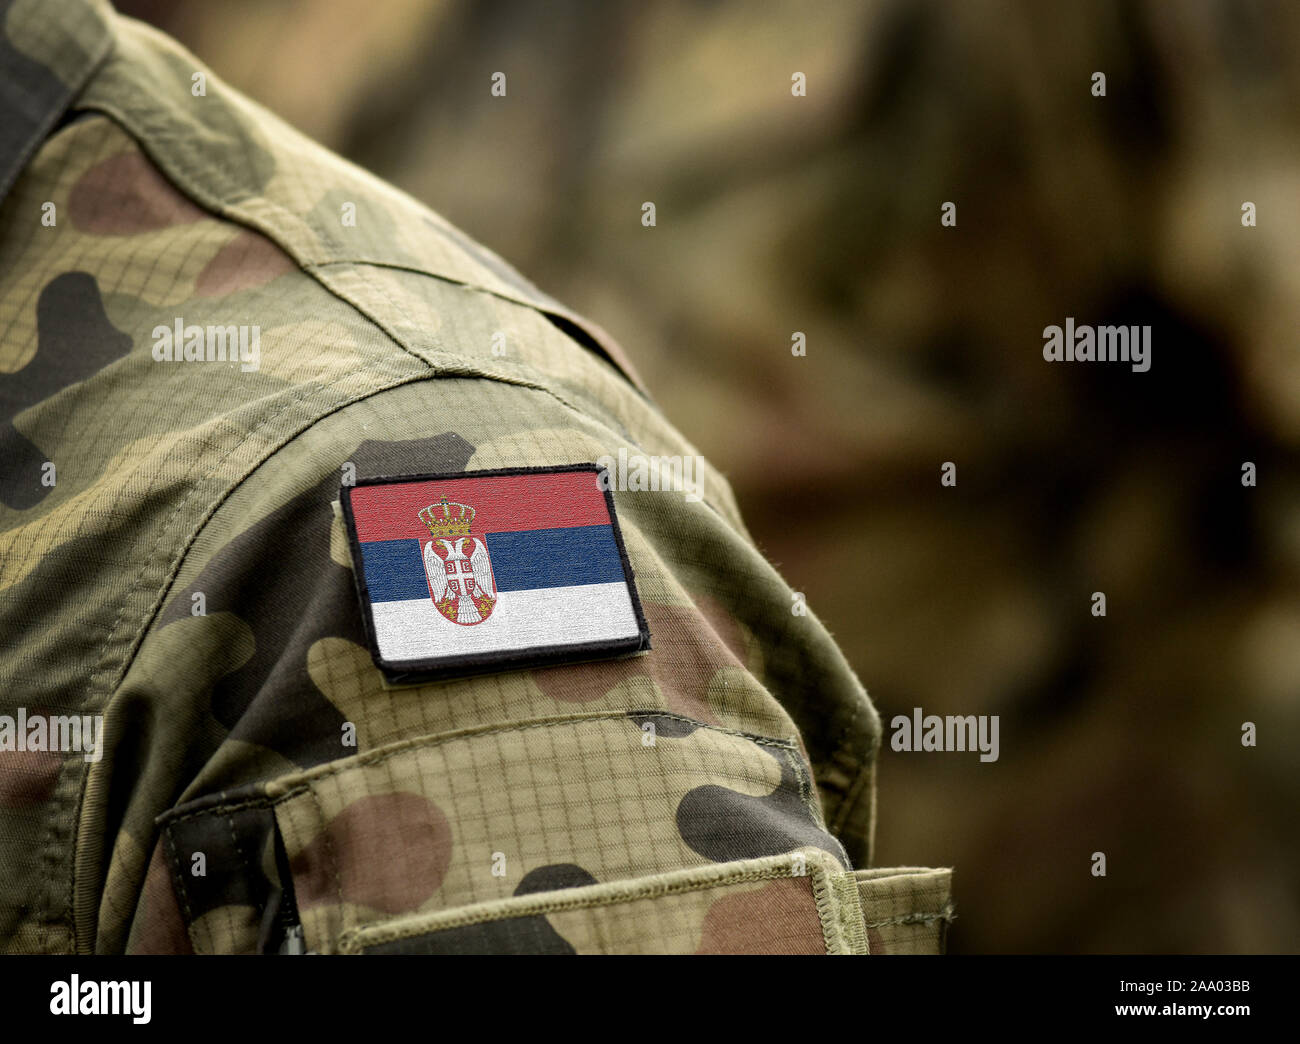 Flag of Serbia on military uniform. Army, armed forces, soldiers. Collage. Stock Photo